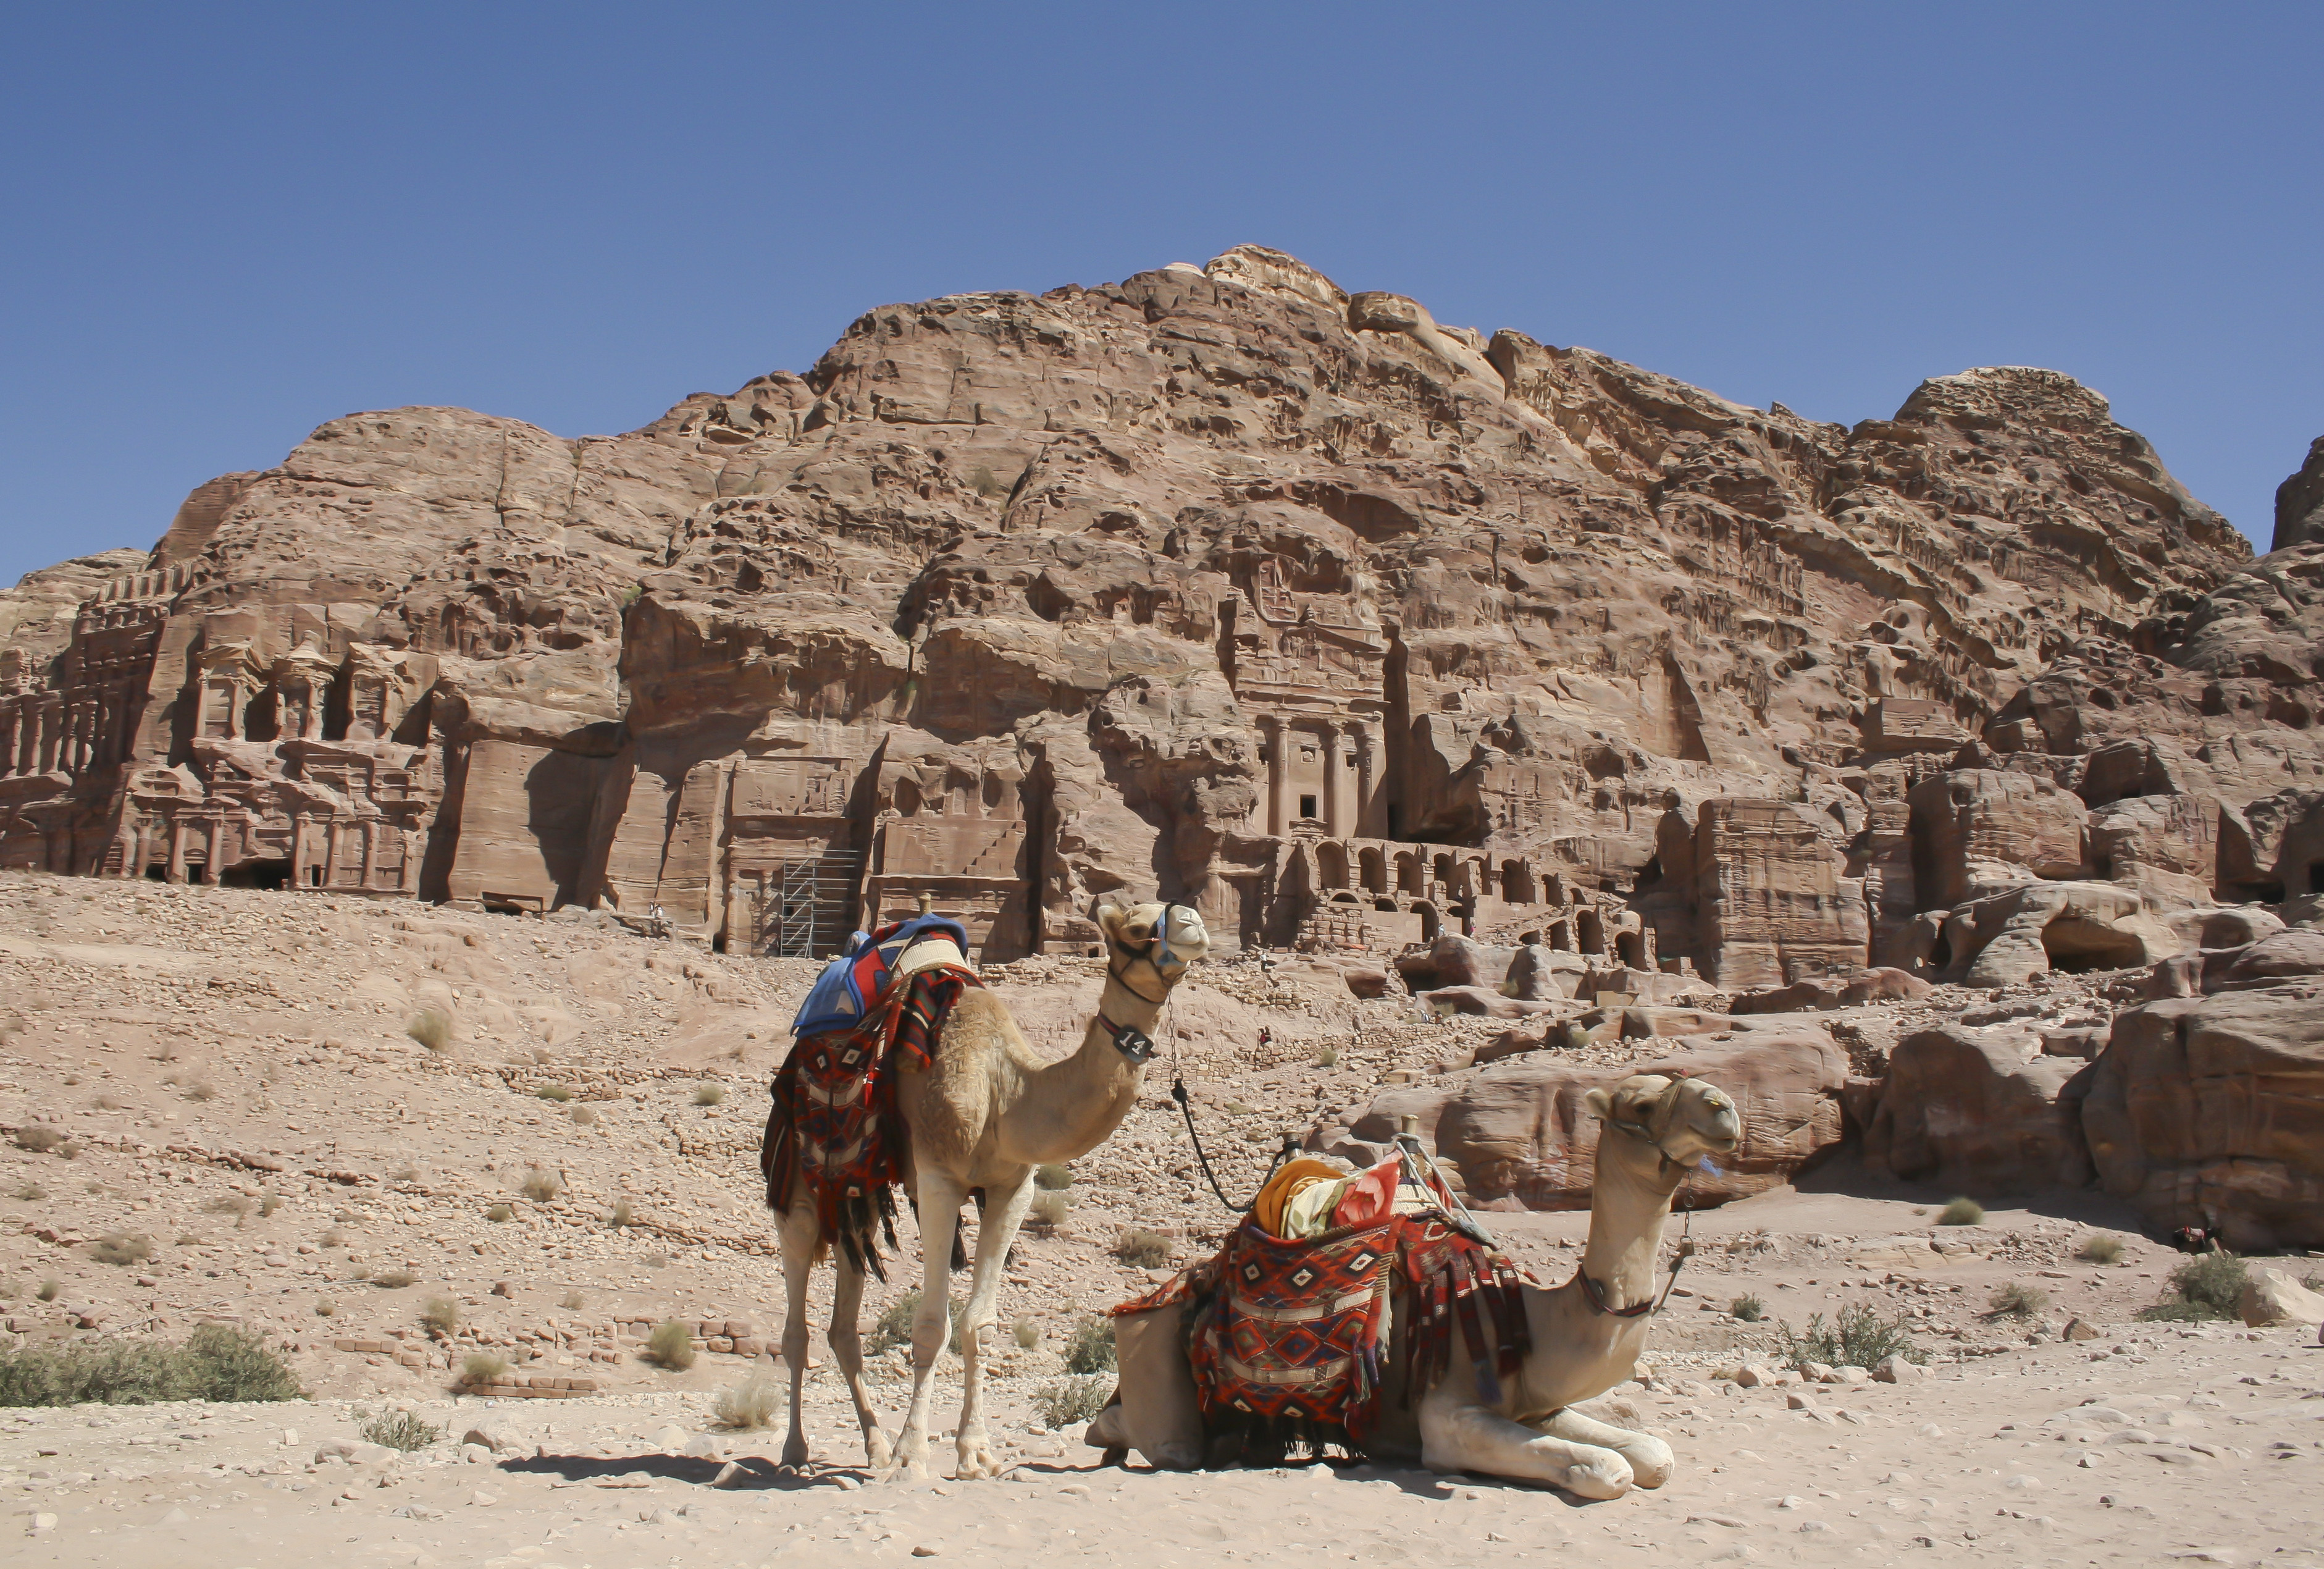 Camels in front of the tombs, Petra, Jordan